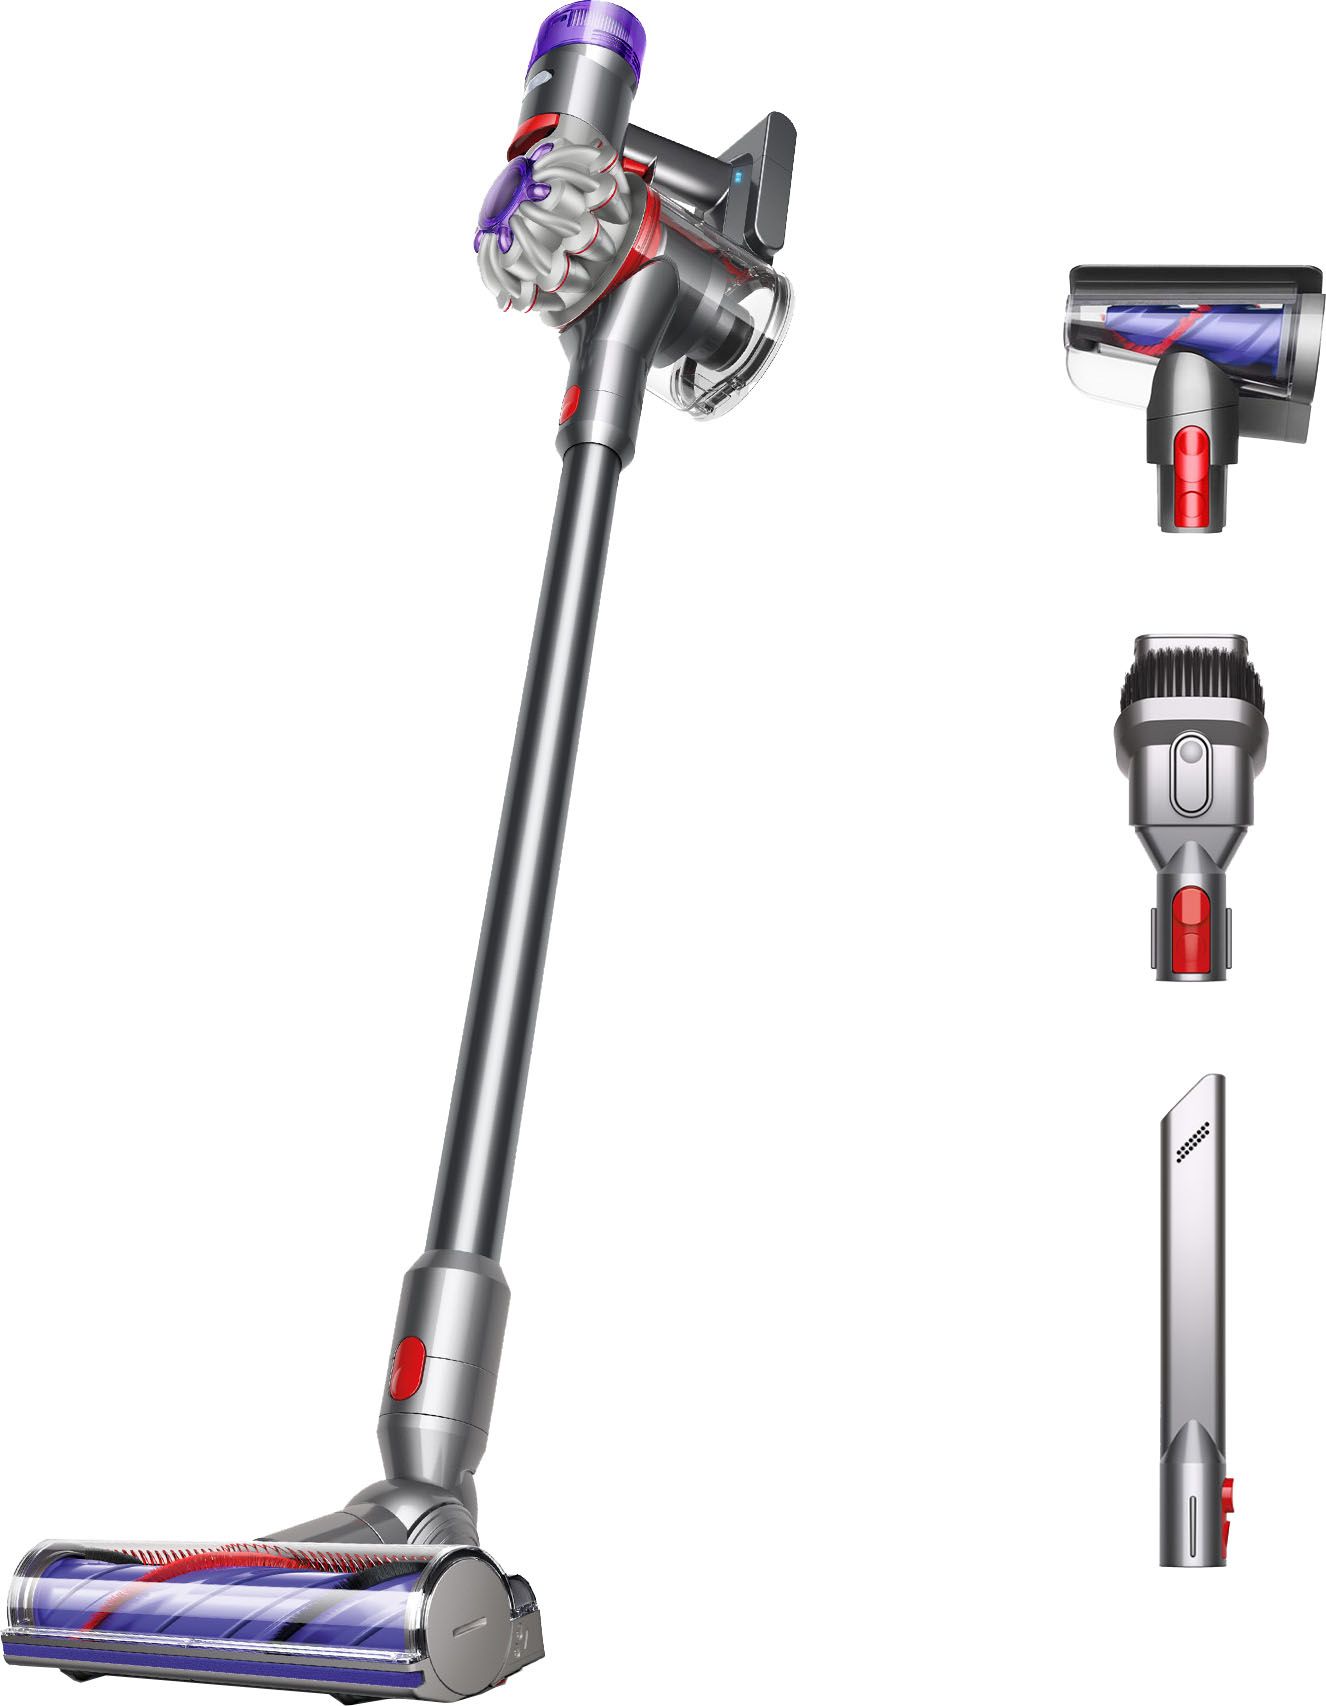 Dyson V8 Cordless Vacuum with 6 accessories Silver/Nickel 400473-01 - Best Buy | Best Buy U.S.